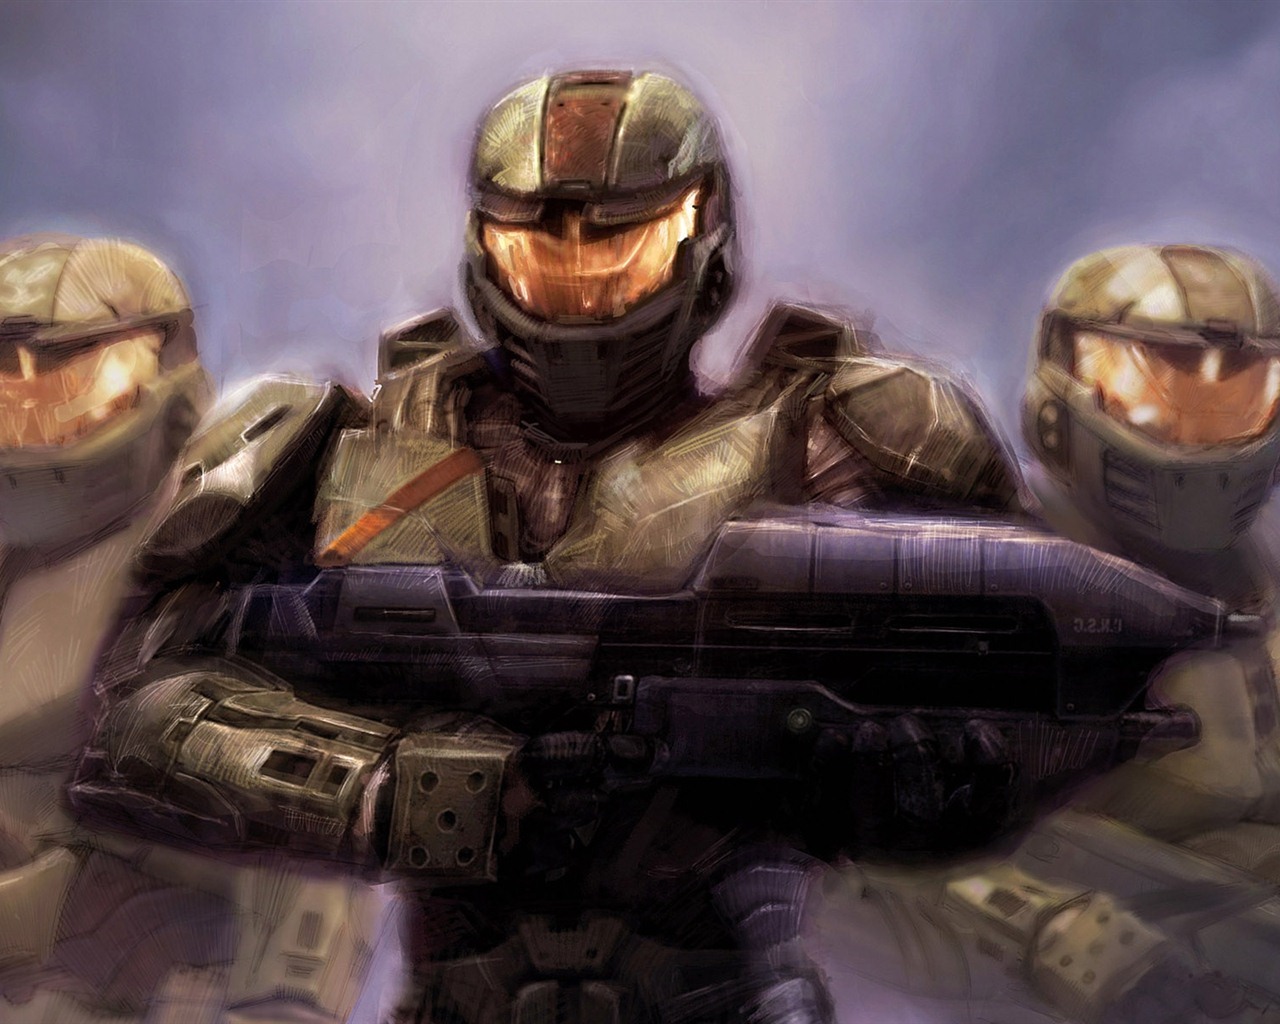 Halo game HD wallpapers #16 - 1280x1024